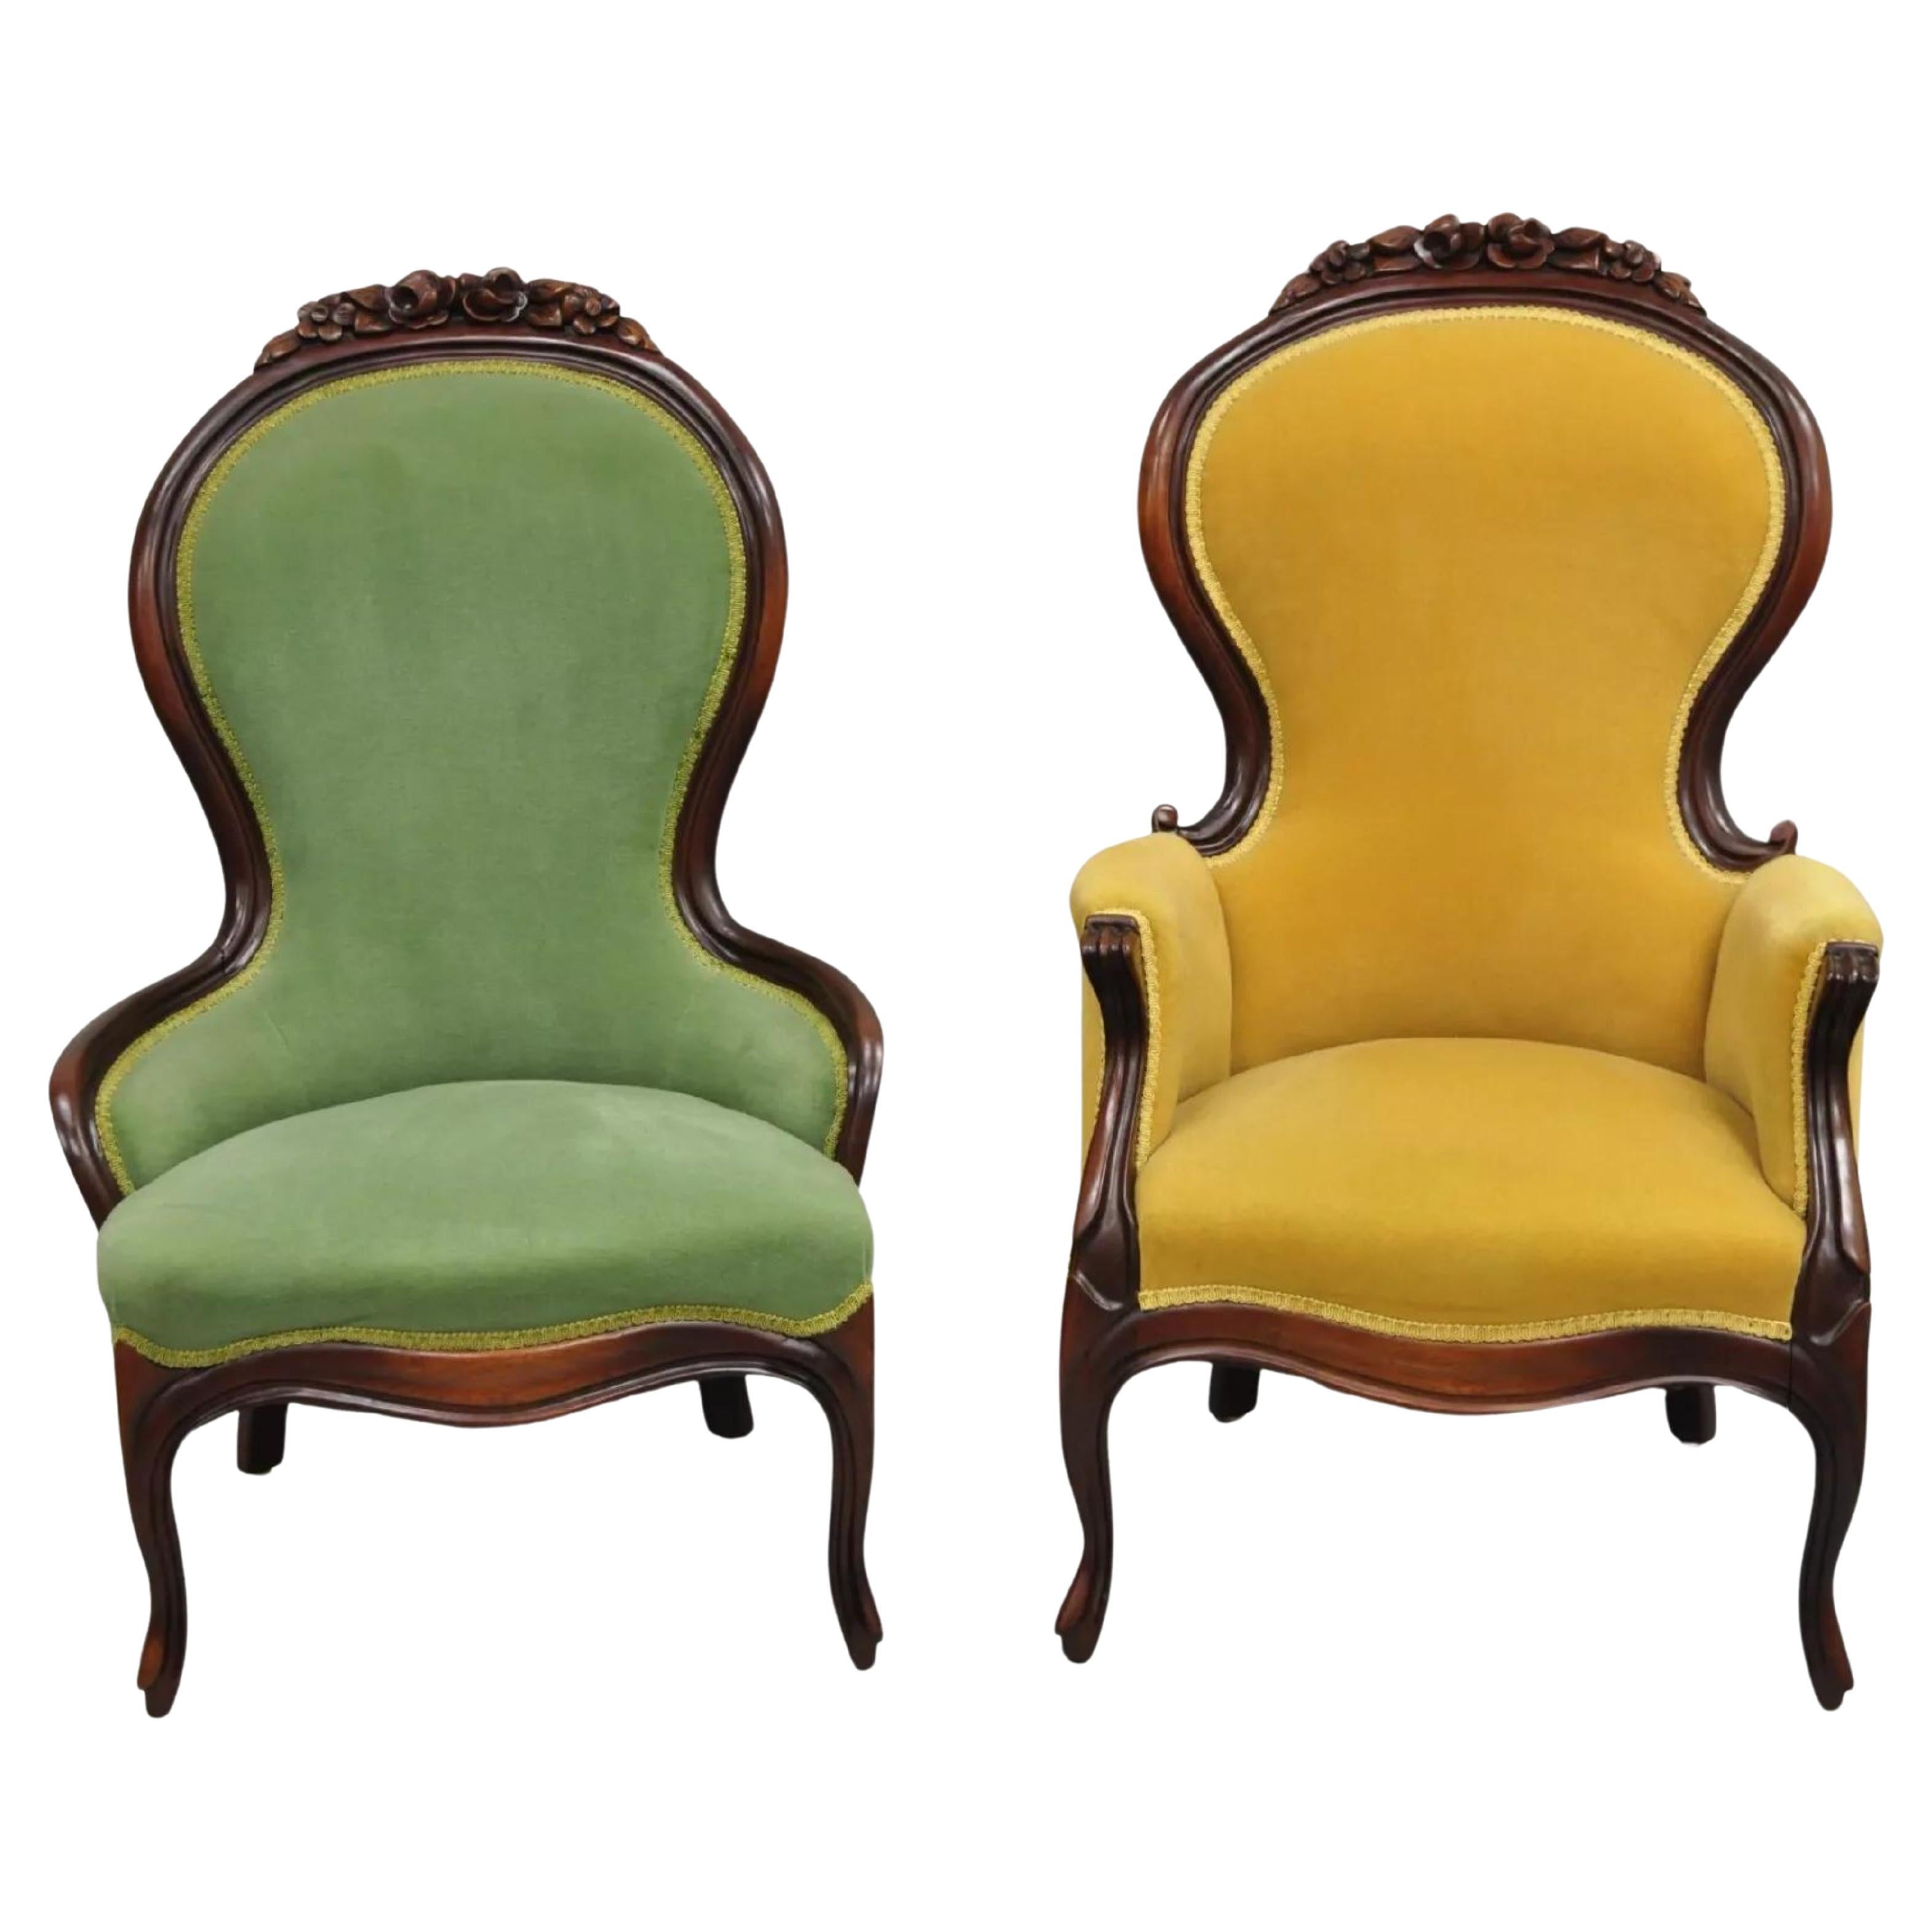 Vintage Victorian Green & Yellow His & Hers Rose Carved Parlor Chairs - a Pair